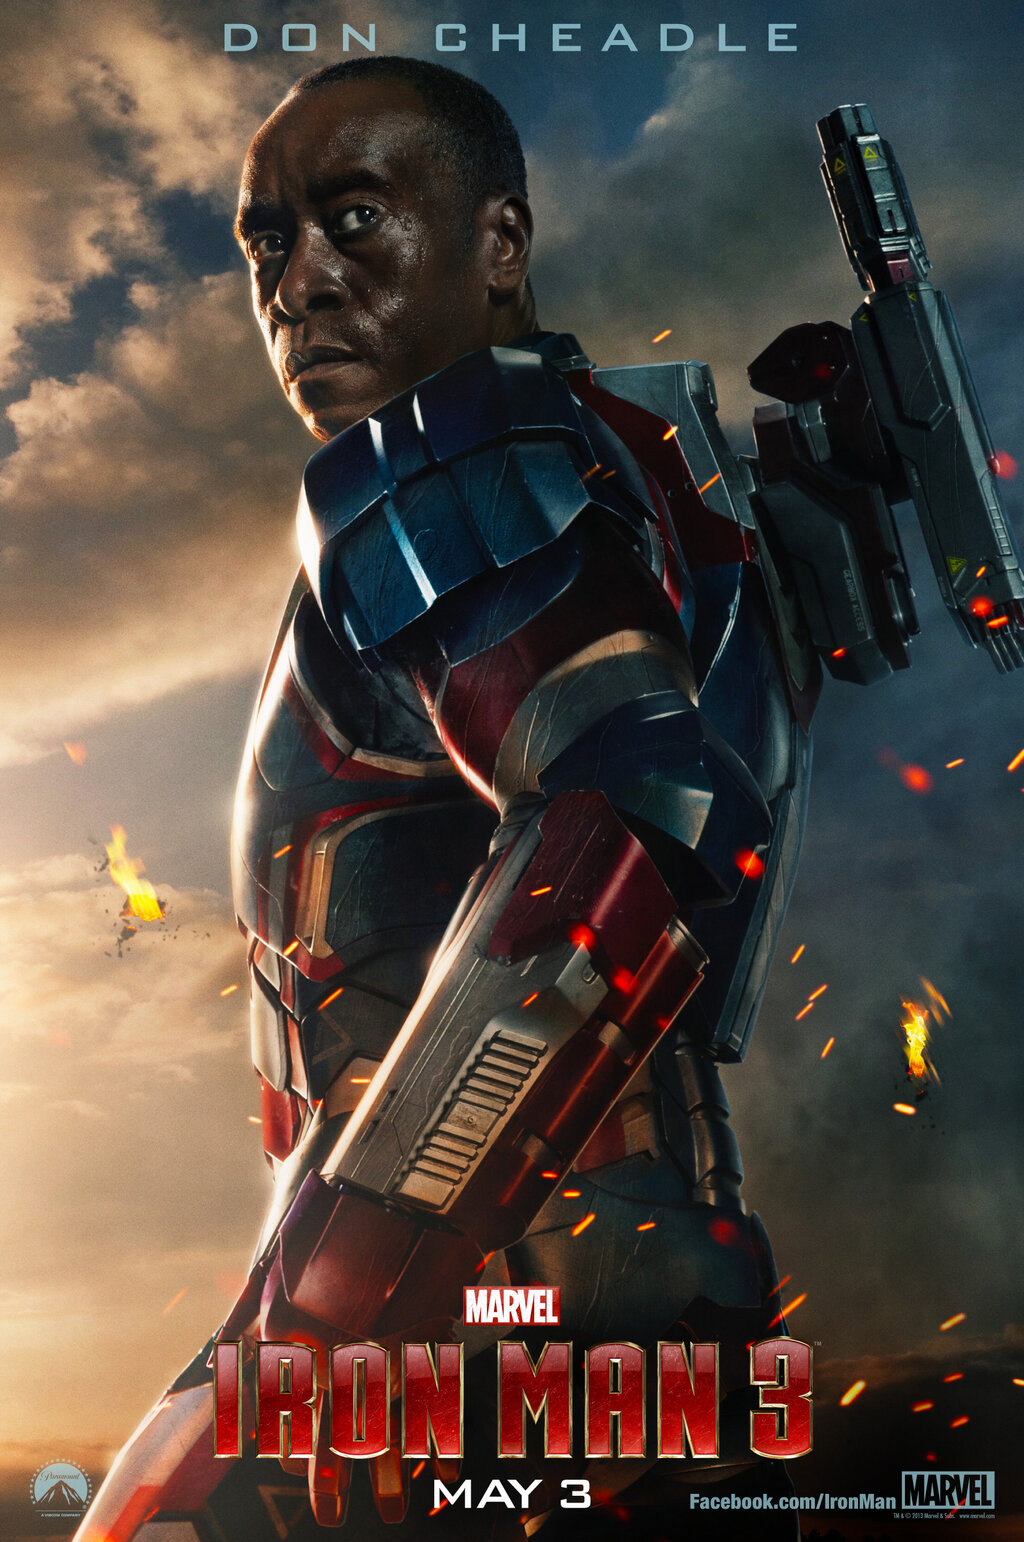 Don Cheadle Is All Suited Up In The New 'Iron Man 20' Poster